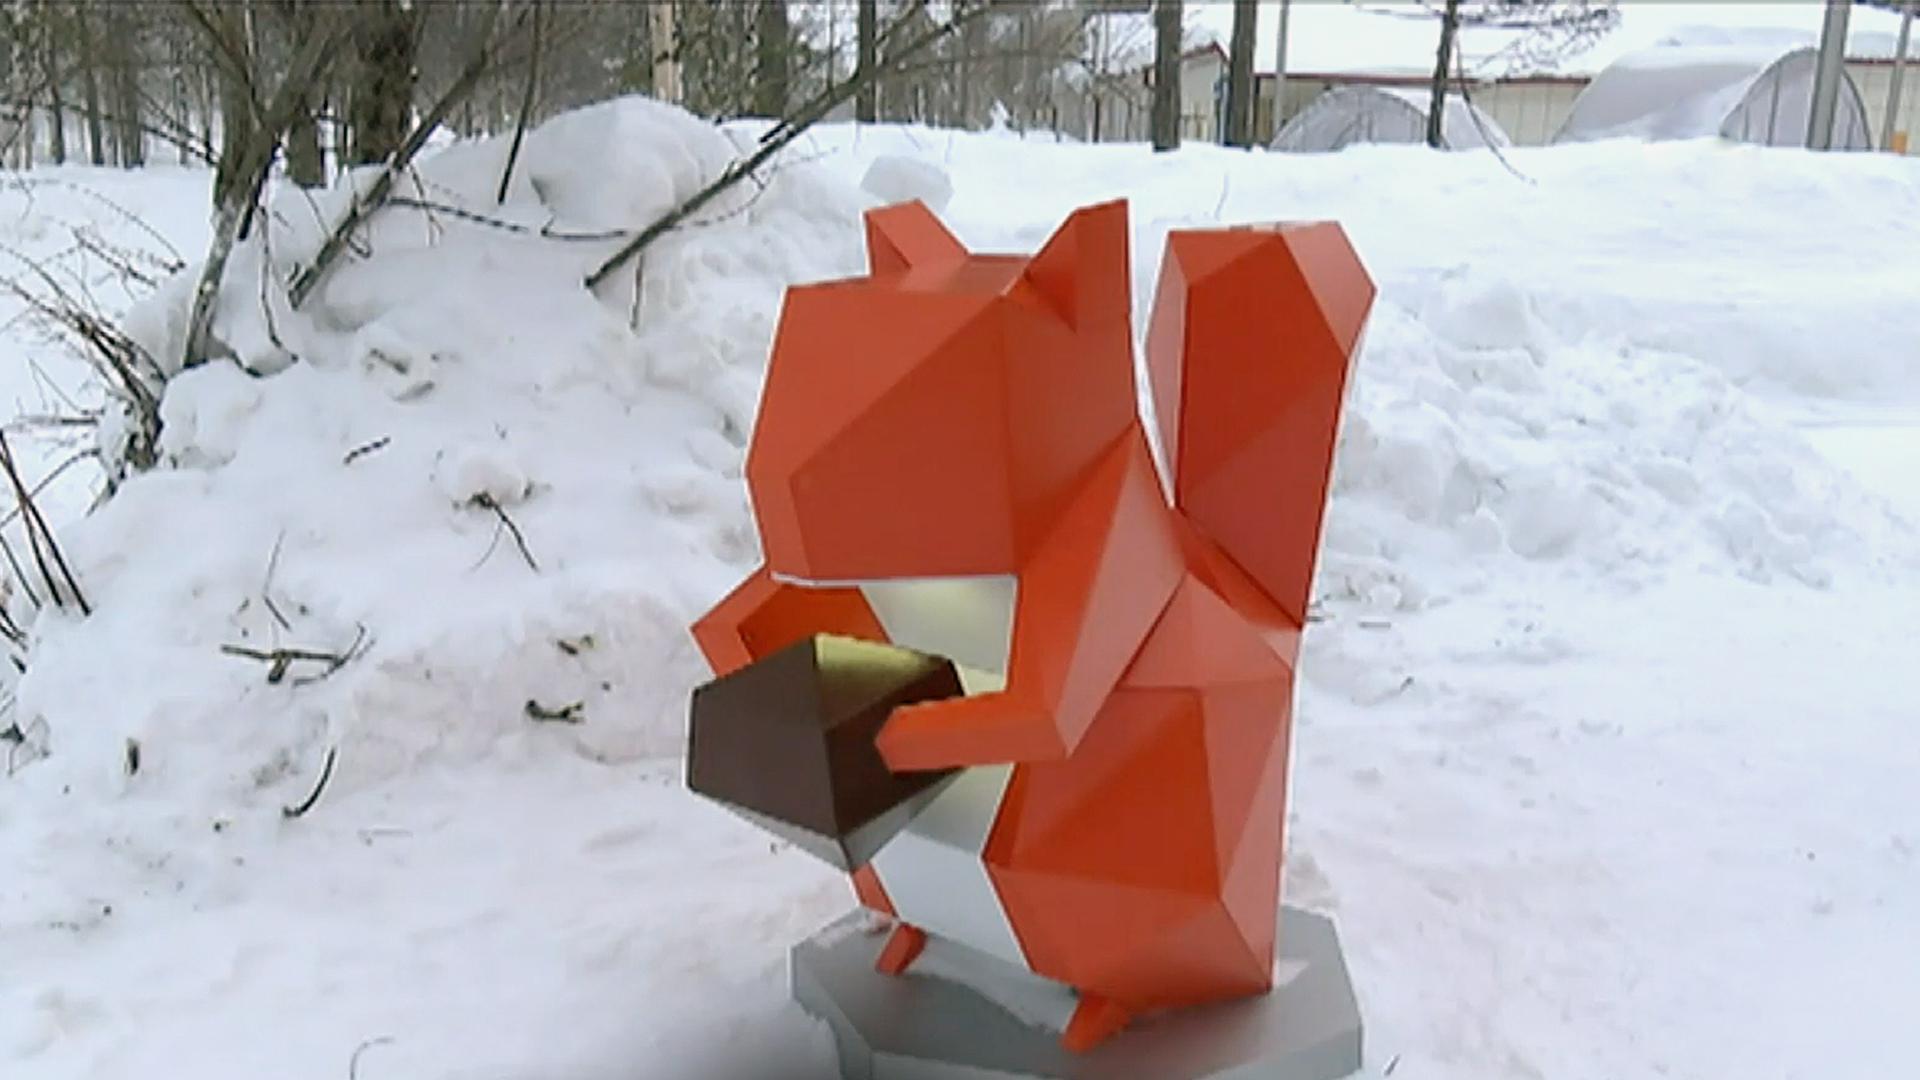 A warming squirrel will save you from the frost - Yamal, Muravlenko, Grants, Creation, Youth, Art object, Art, Video